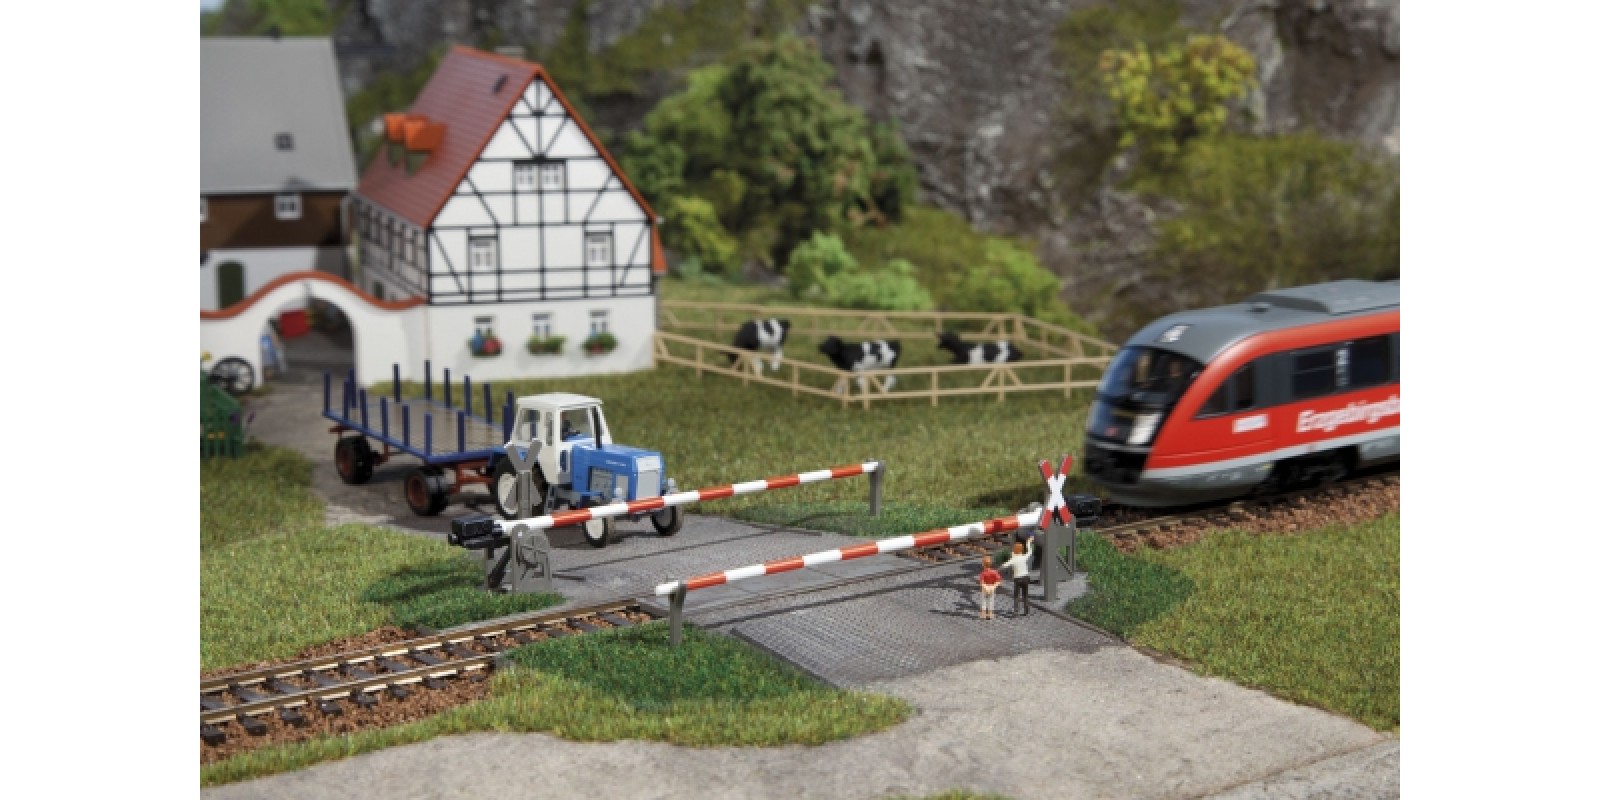 AU41582 Level crossing with barrier